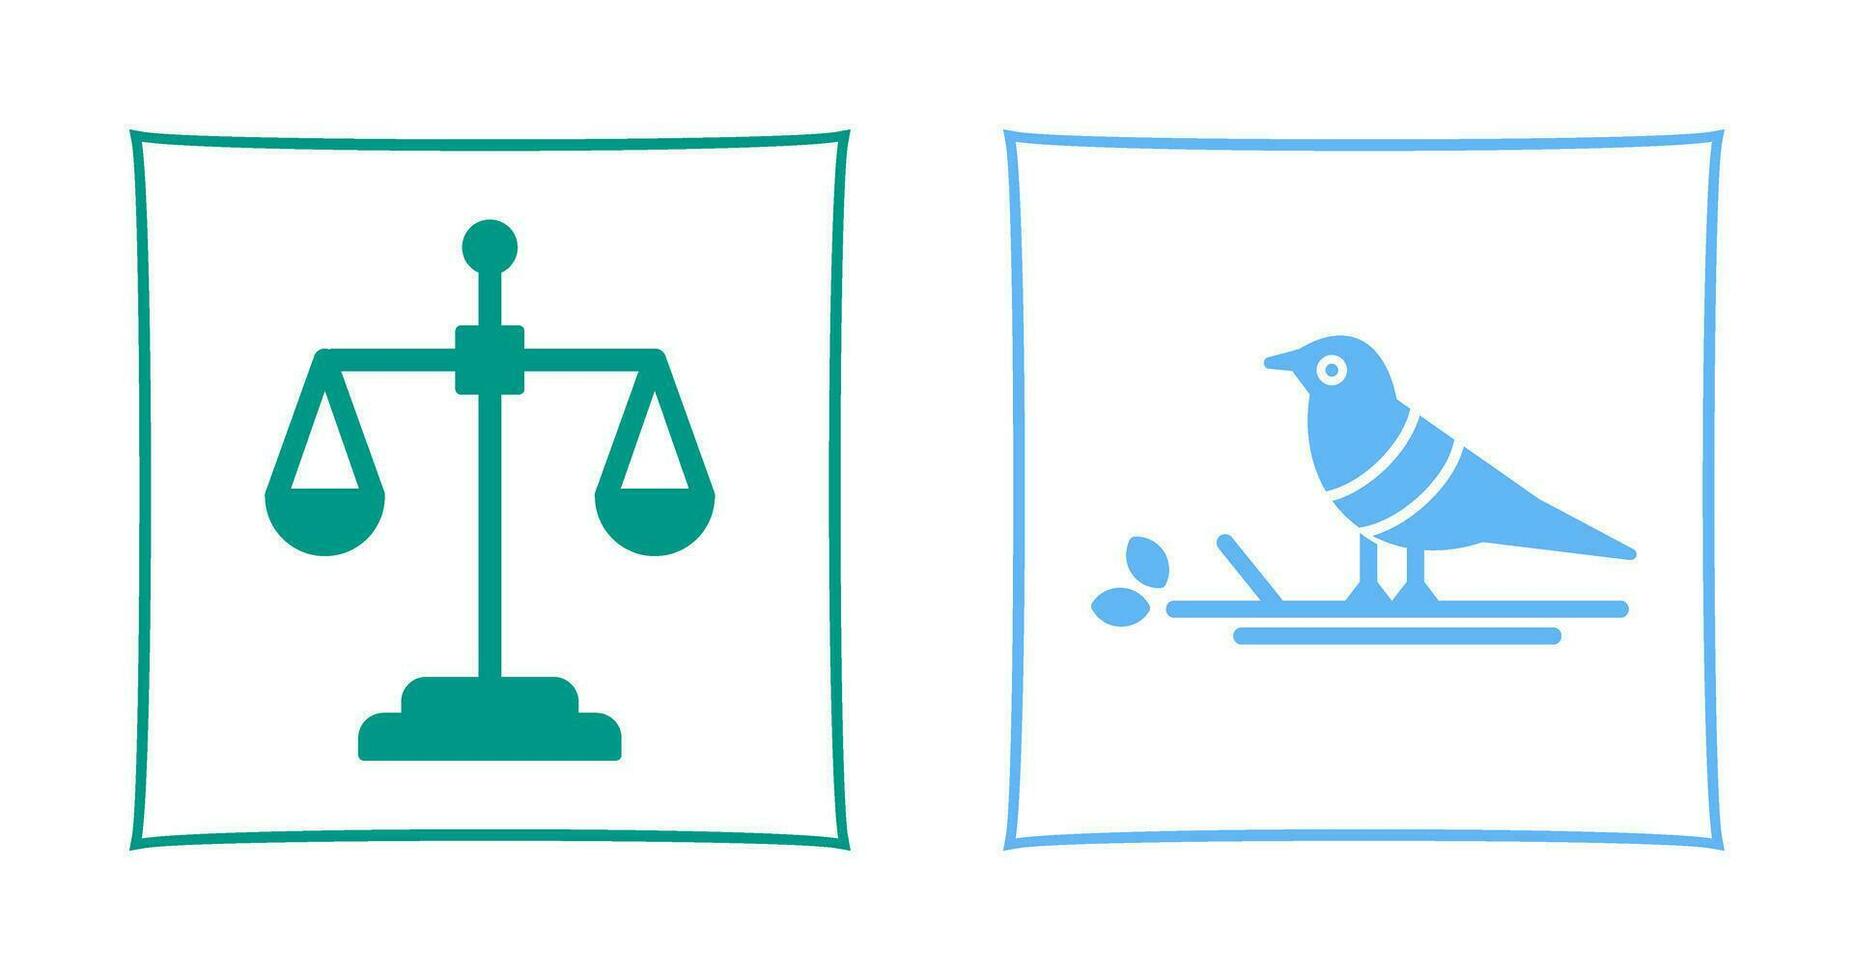 Scale and Bird Icon vector